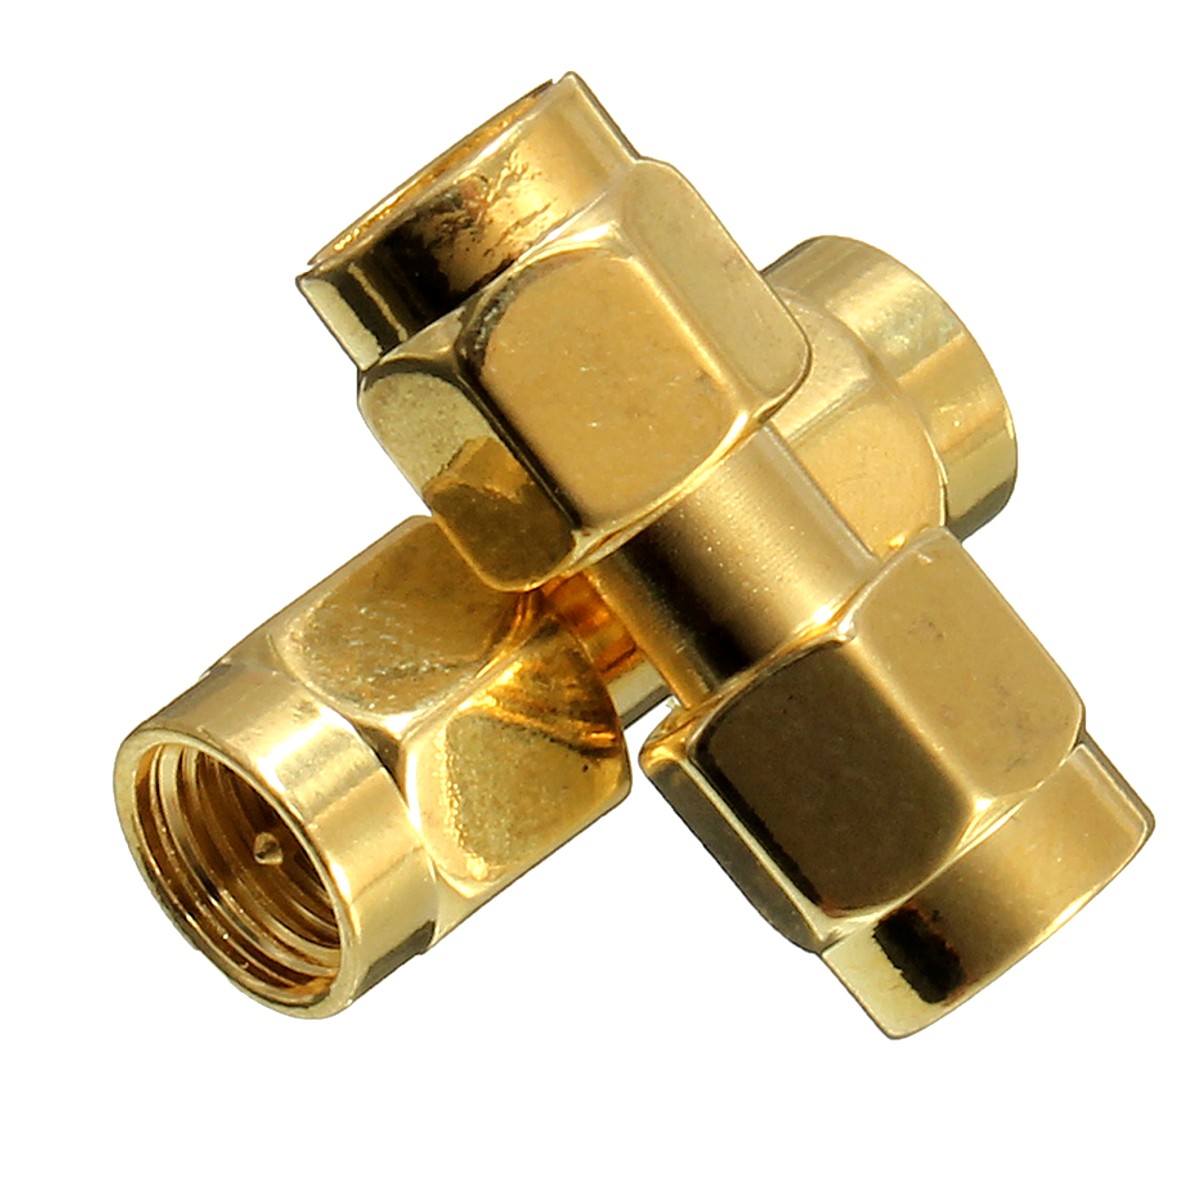 Excellwayreg-CA01-2Pcs-Copper-SMA-Male-To-SMA-Male-Plug-RF-Coaxial-Adapter-Connector-1073343-1